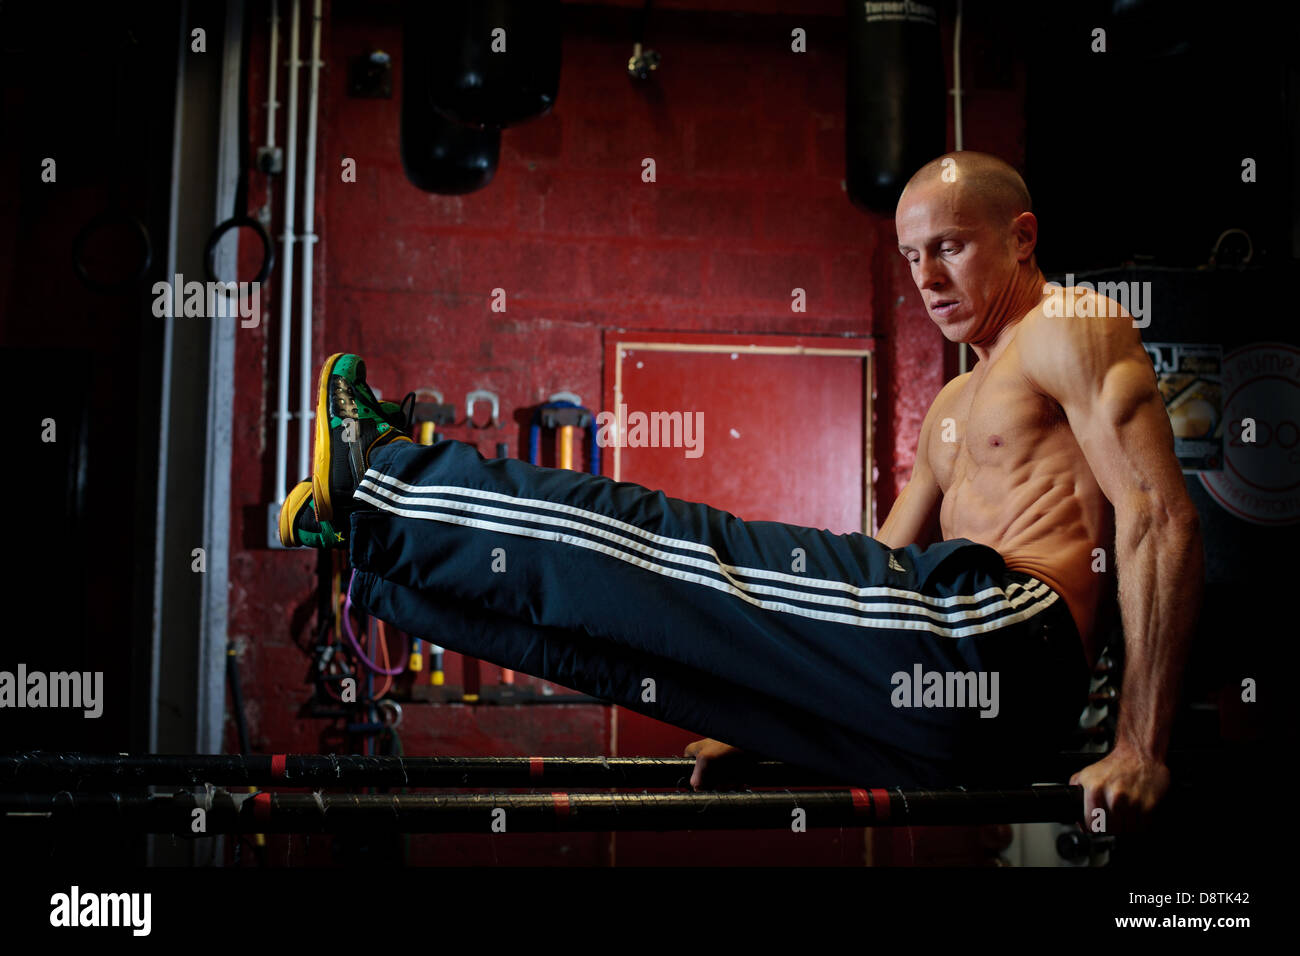 Personal Trainer Rhys John, working out with series of body weight exercises in a gym. Stock Photo